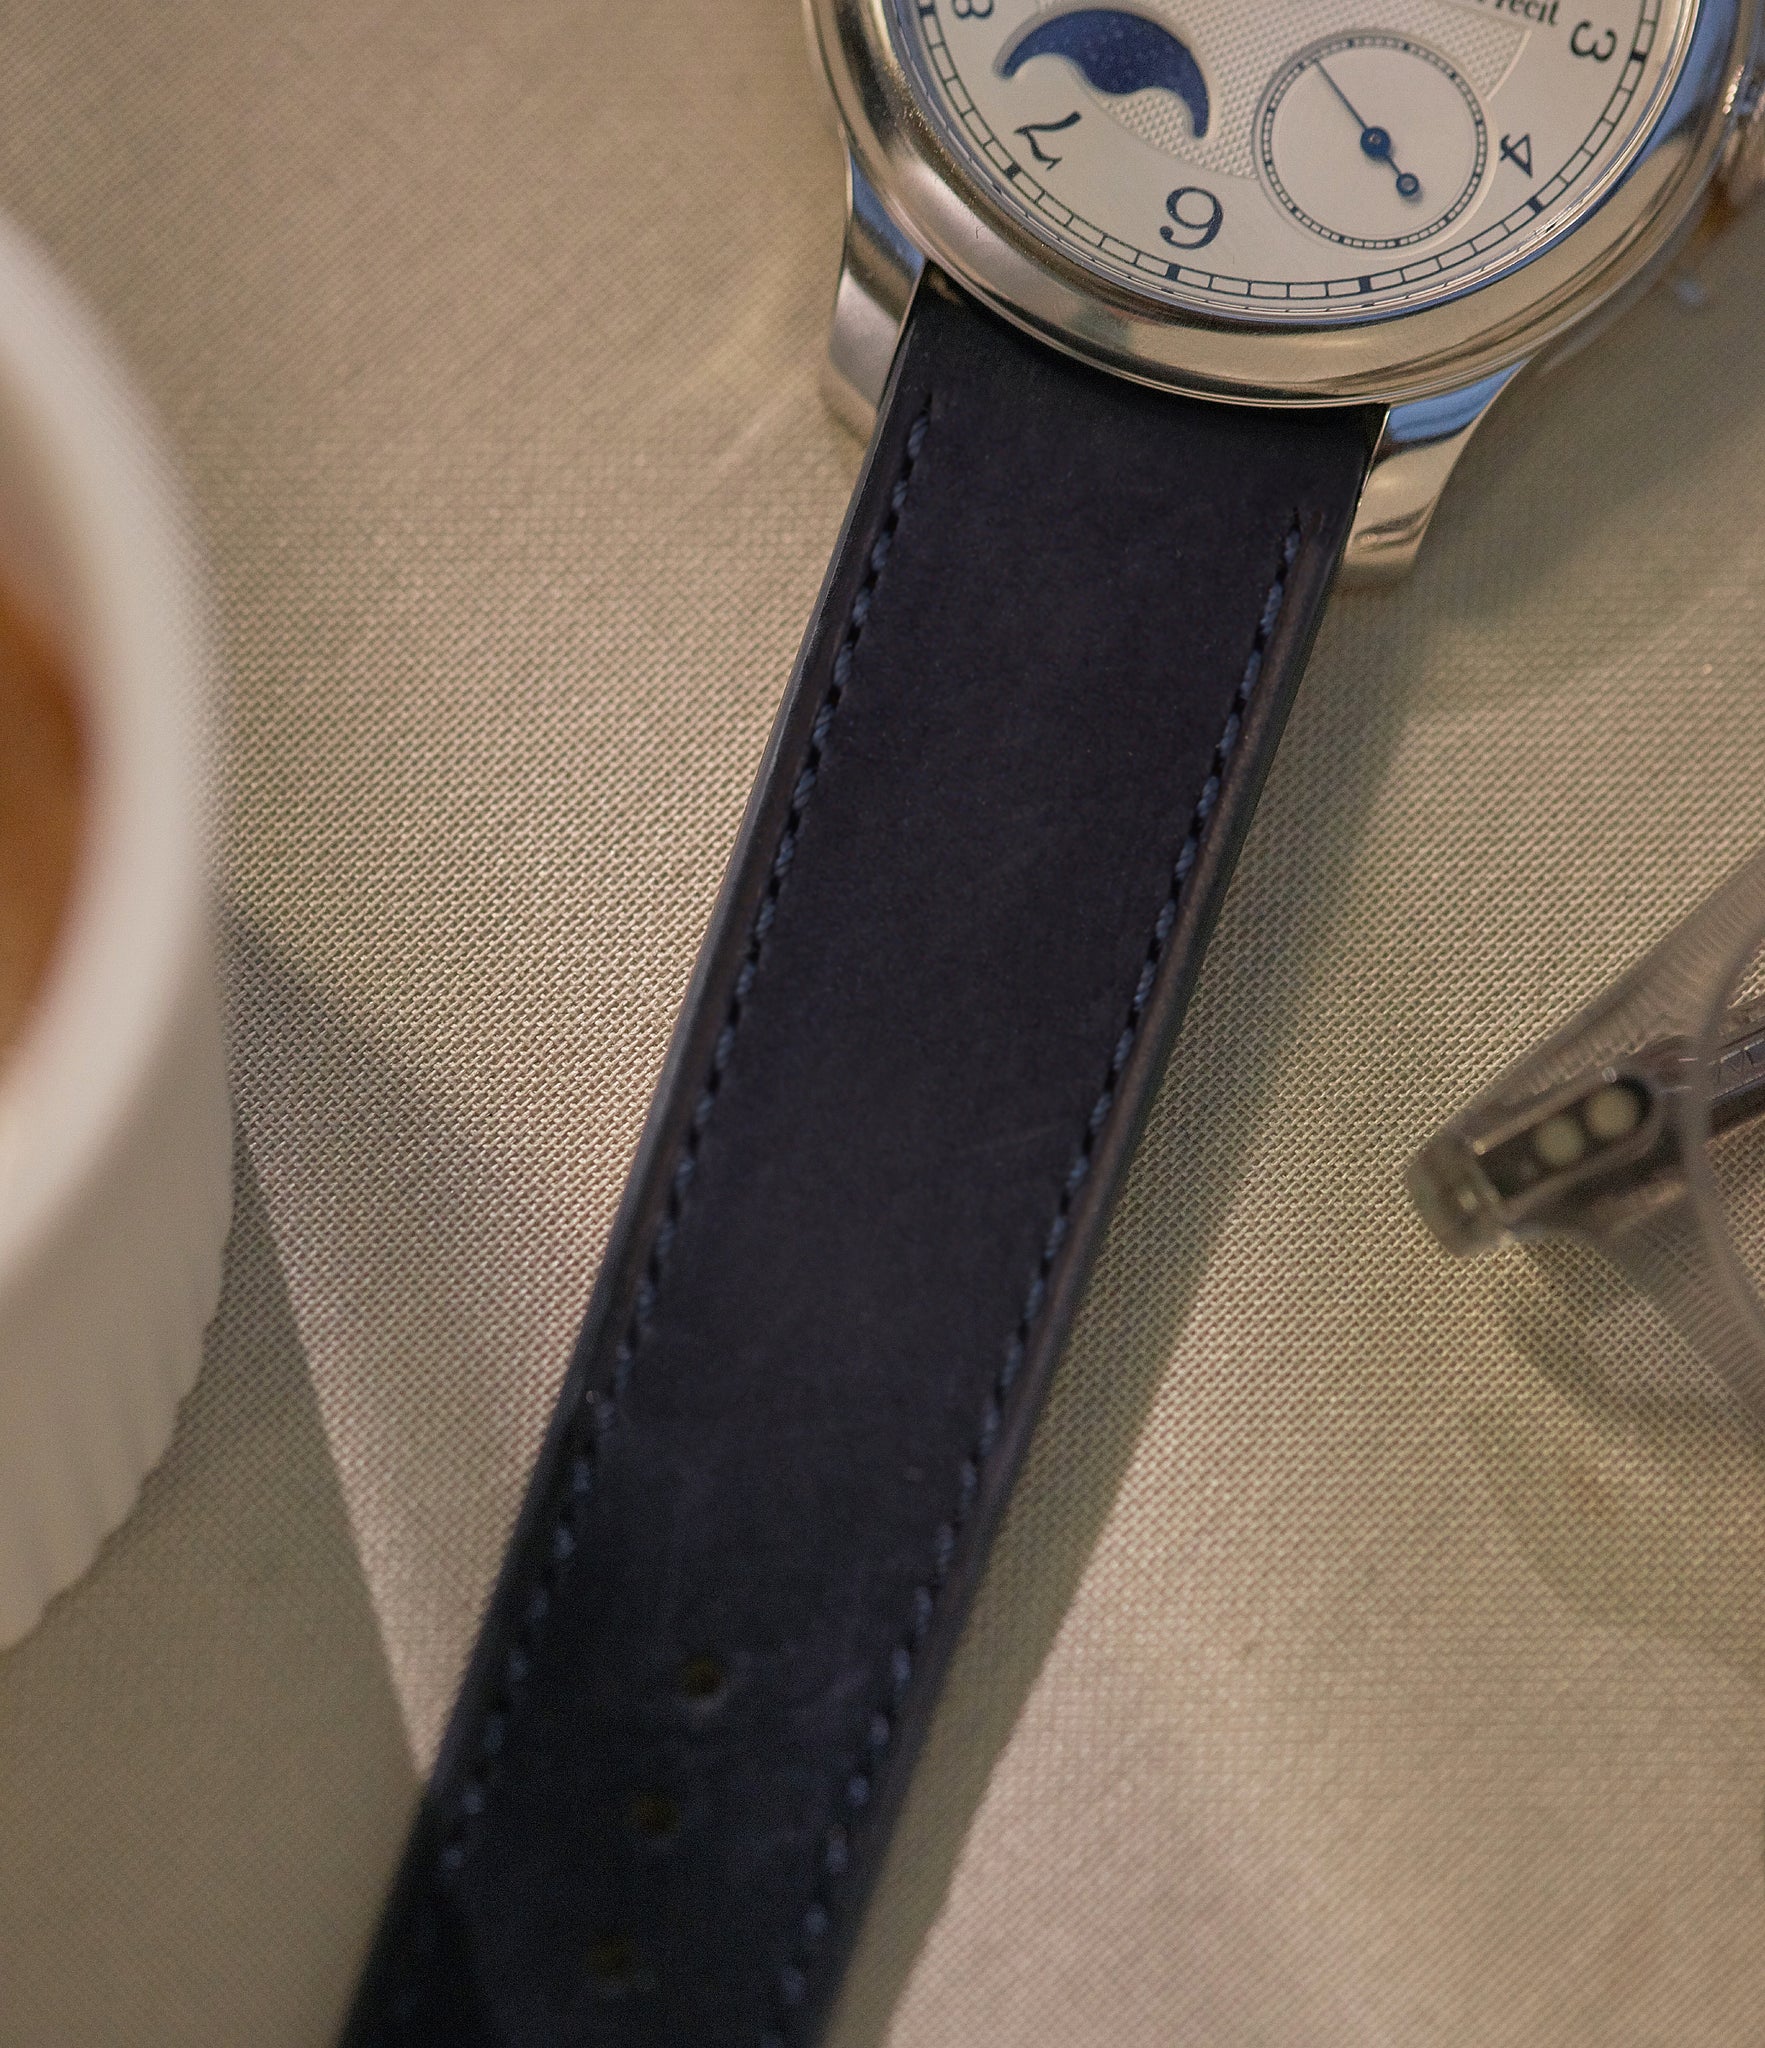 Buy 20mm x 19mm Lisbon Molequin F. P. Journe curved watch strap indigo blue nubuck leather quick-release springbars buckle handcrafted European-made for sale online at A Collected Man London